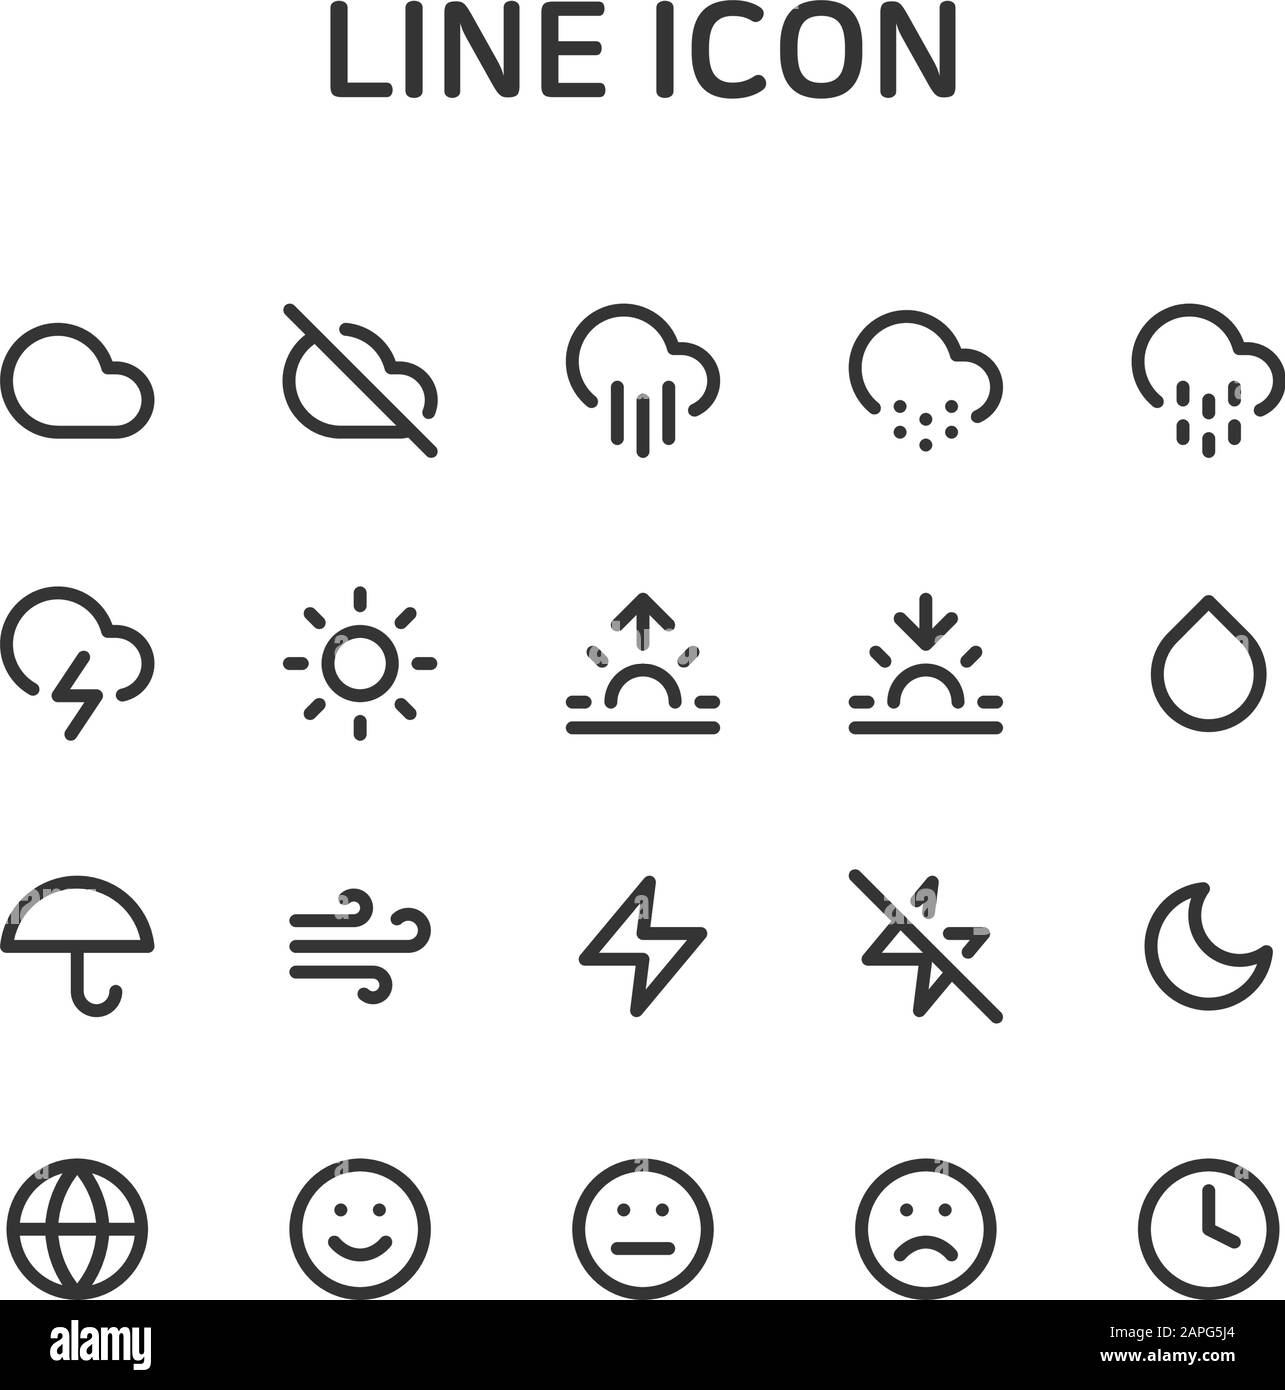 Simple Set of Line Icons illustration 009 Stock Vector